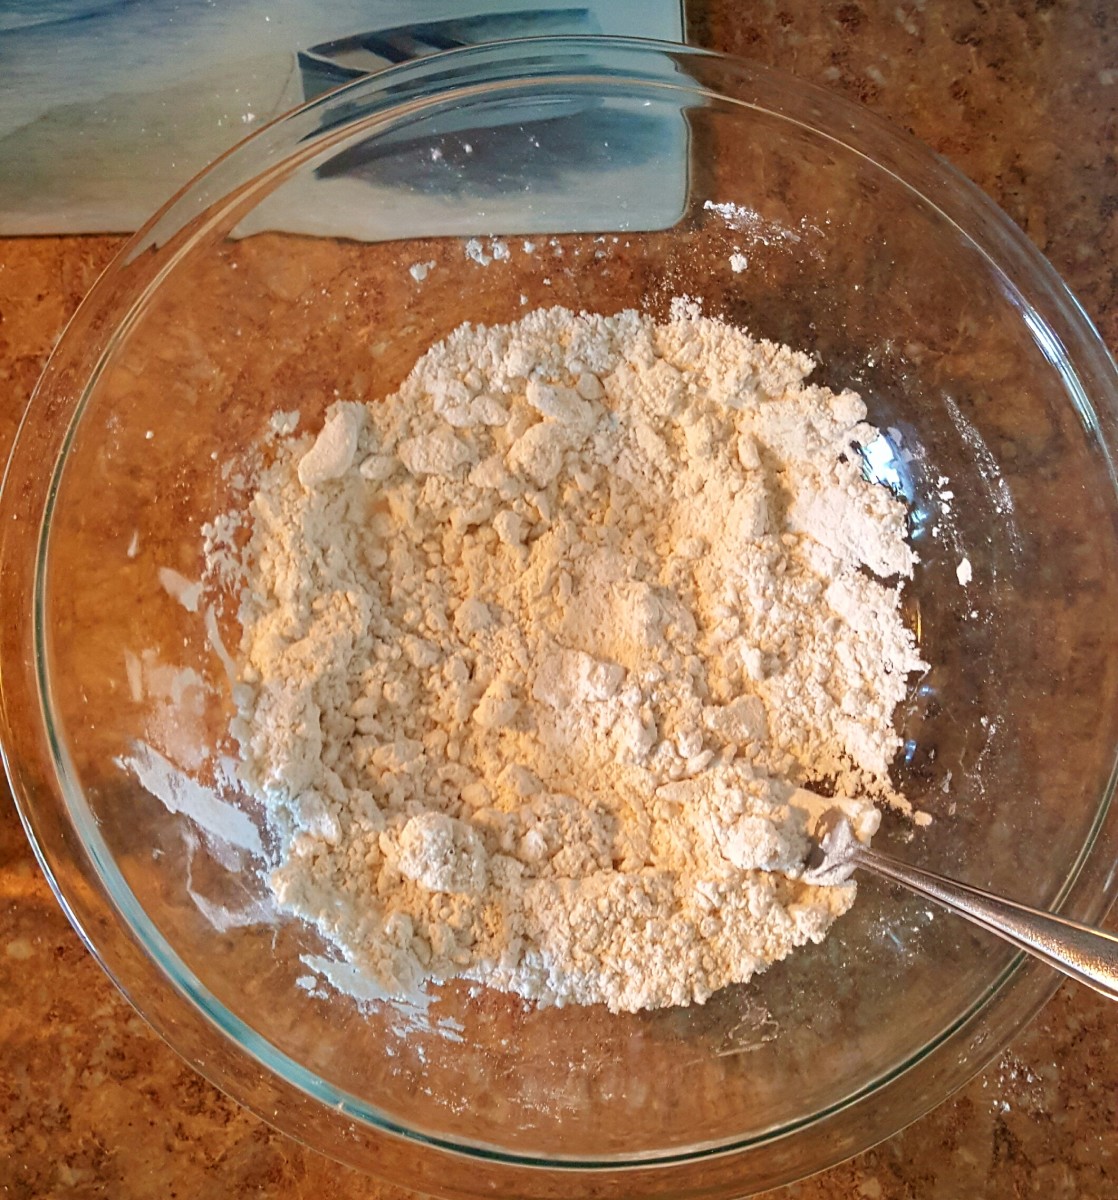 Step 2: Mixture should resemble coarse meal after stirring in shortening.